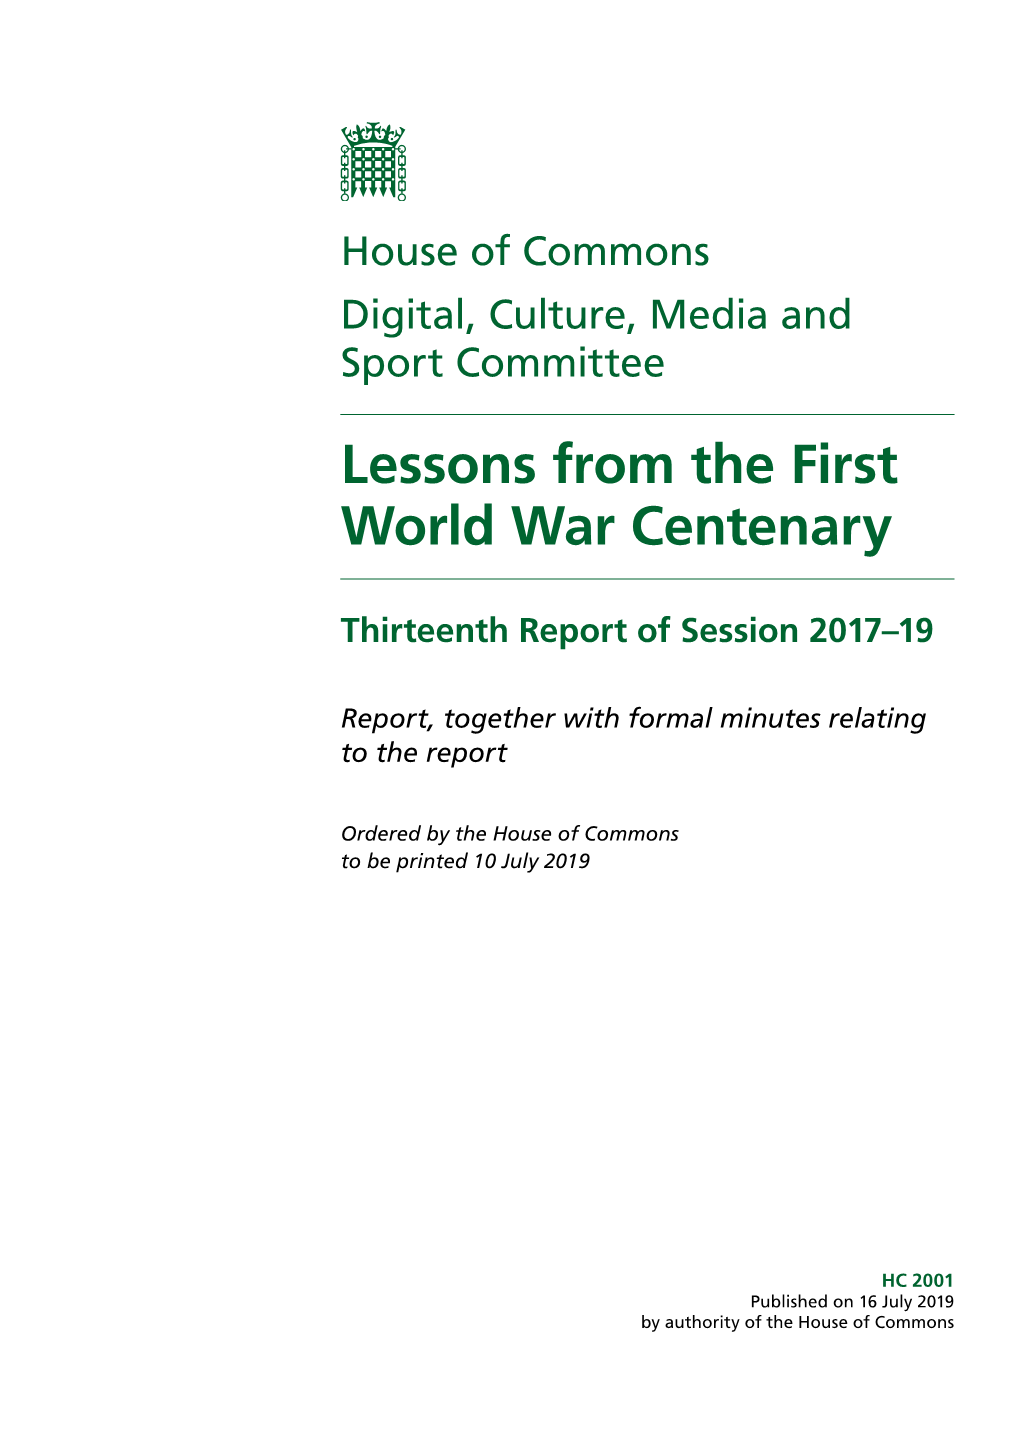 Lessons from the First World War Centenary